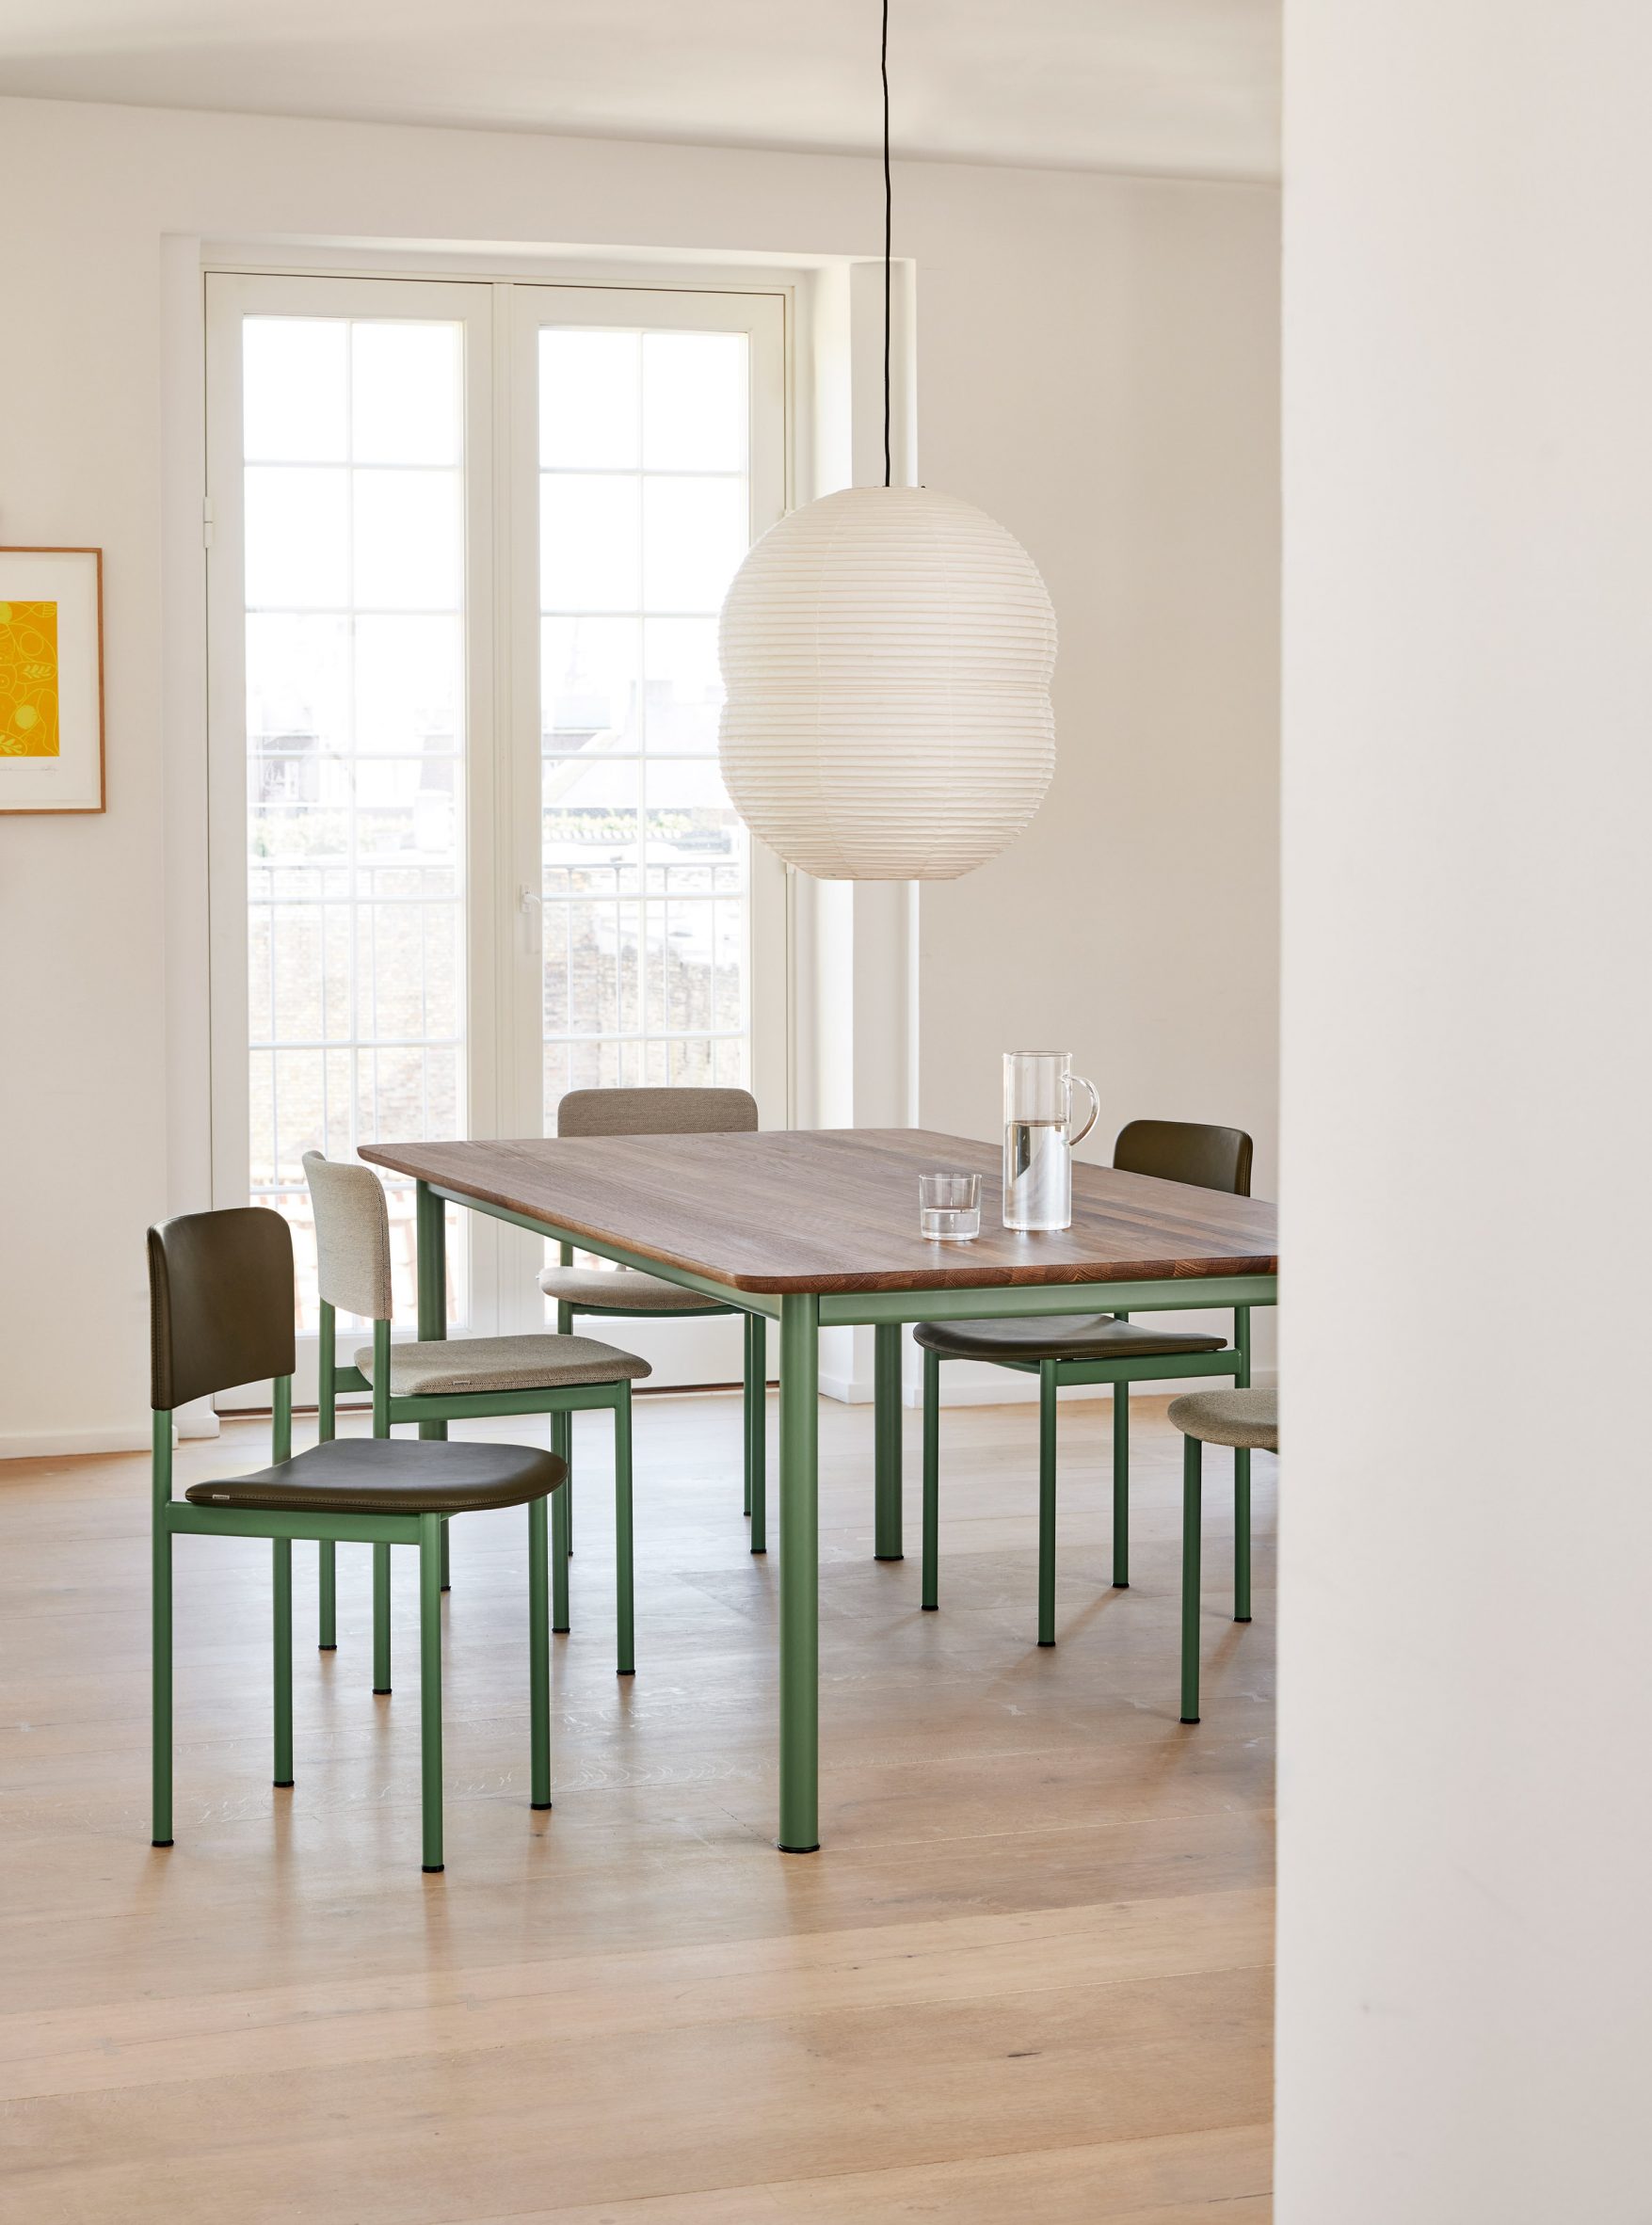 Plan chair by Barber Osgerby for Fredericia